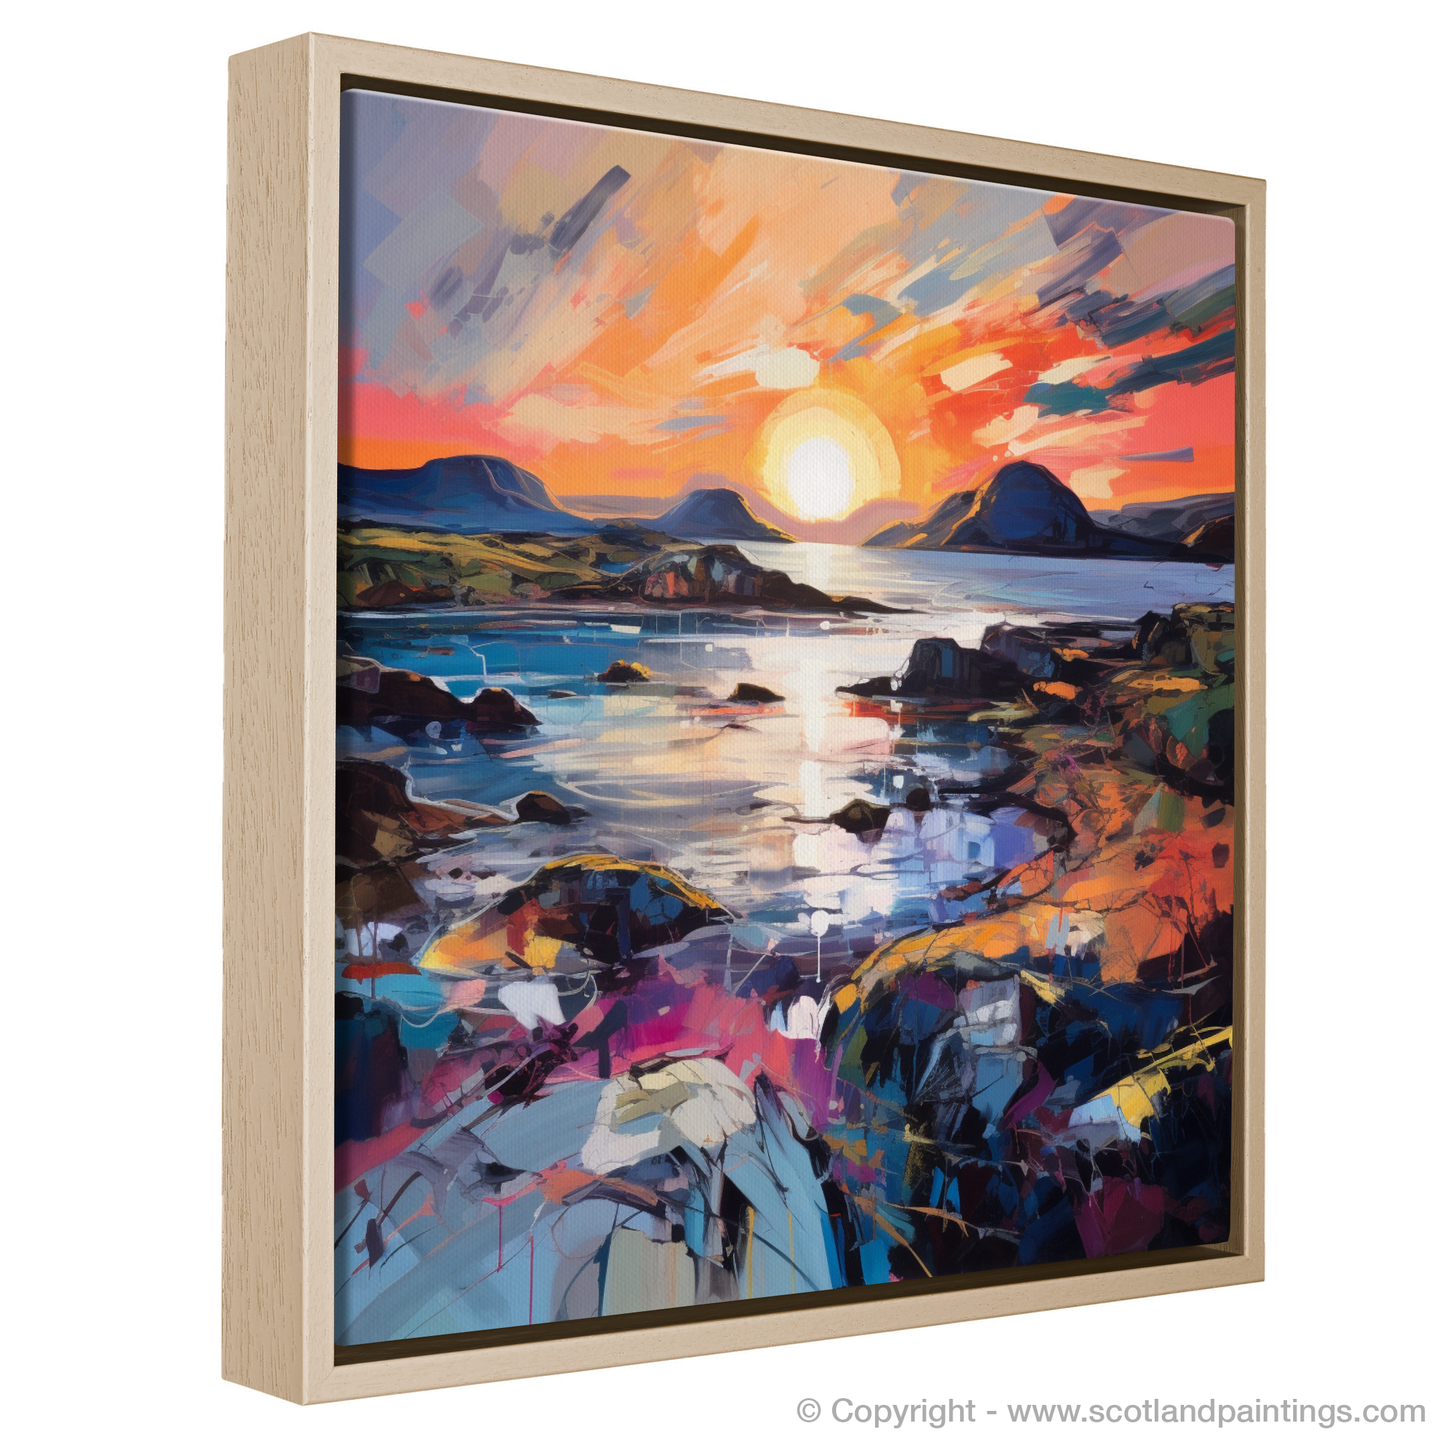 Painting and Art Print of Ardtun Bay at sunset entitled "Ardtun Bay Sunset Blaze: An Expressionist Ode to Scottish Coves".